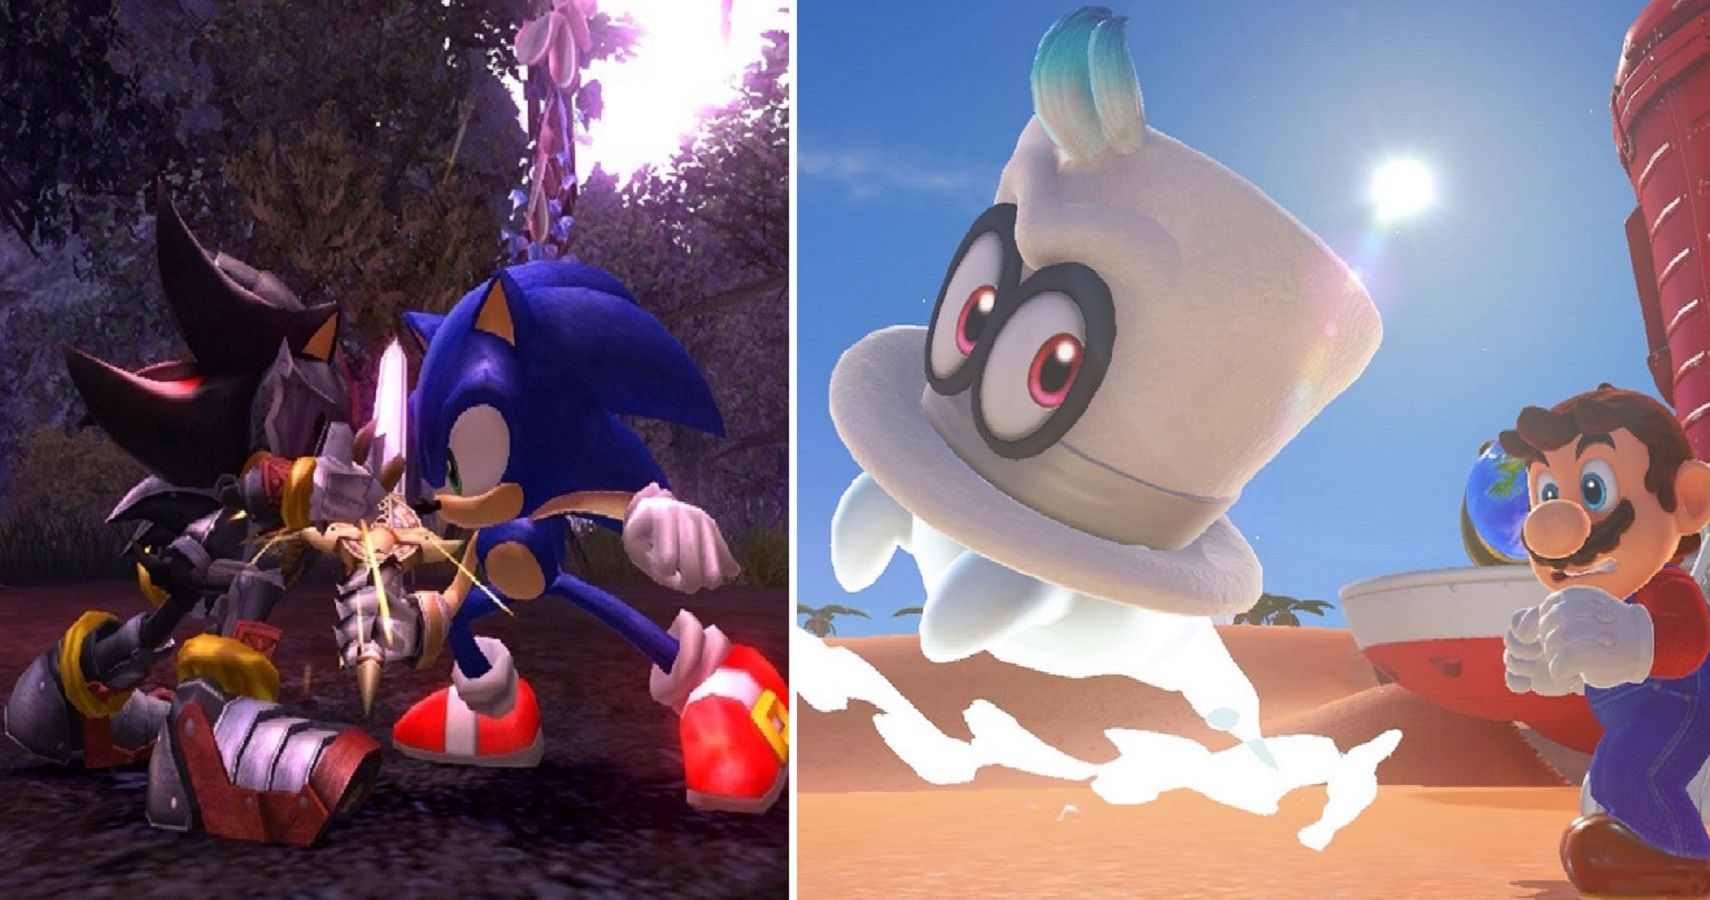 Games Inbox: Is Sonic the Hedgehog better than Super Mario